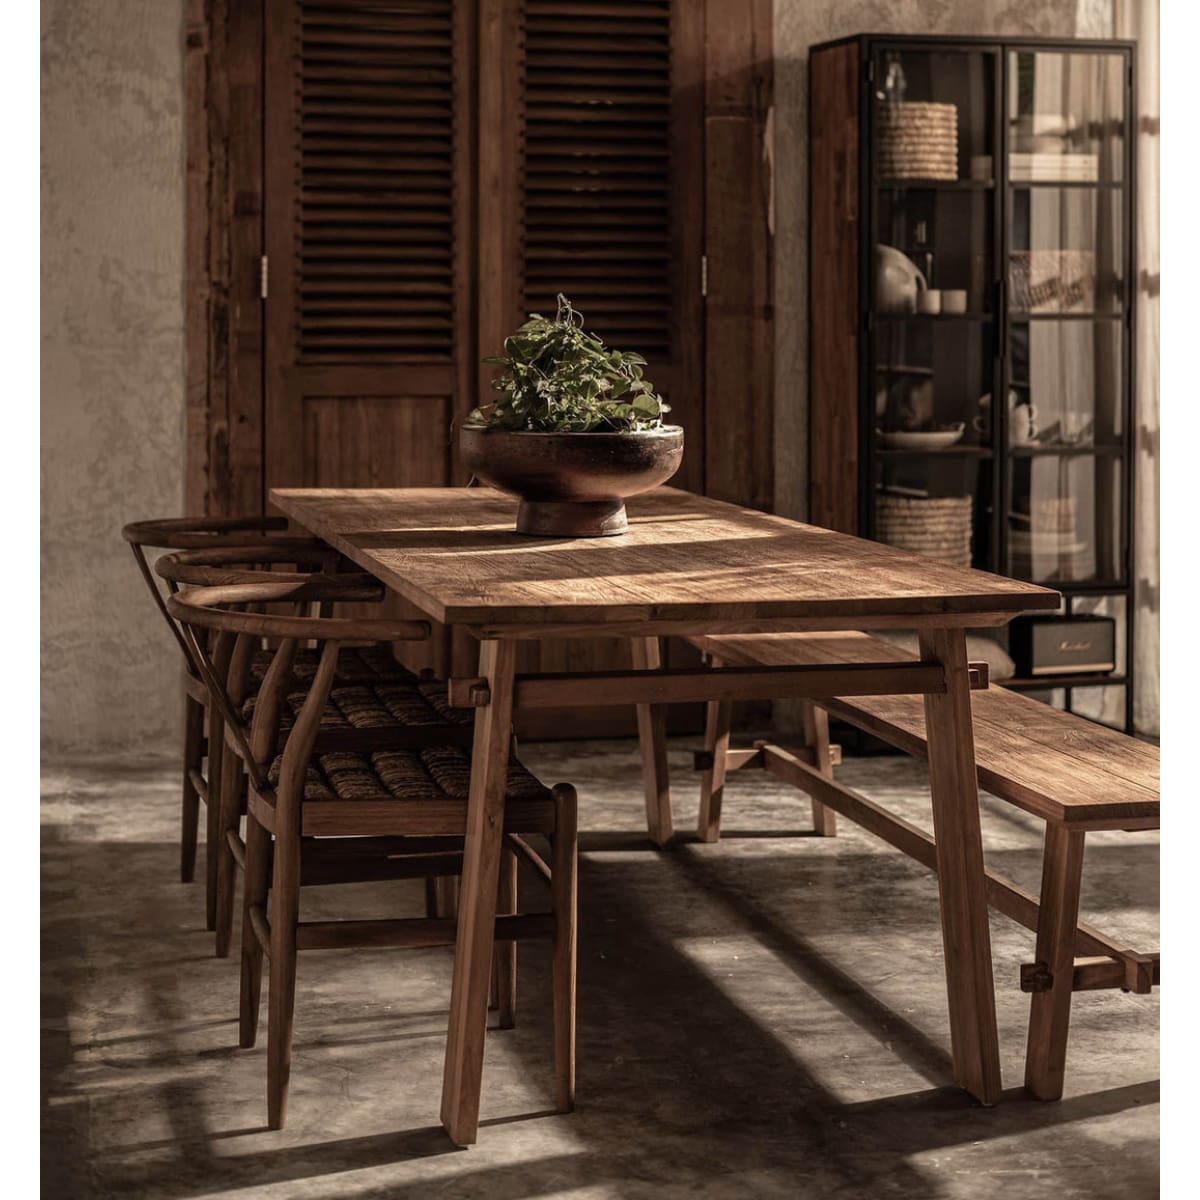 D-Bodhi Artisan Dining Table - lh-import-dining-tables